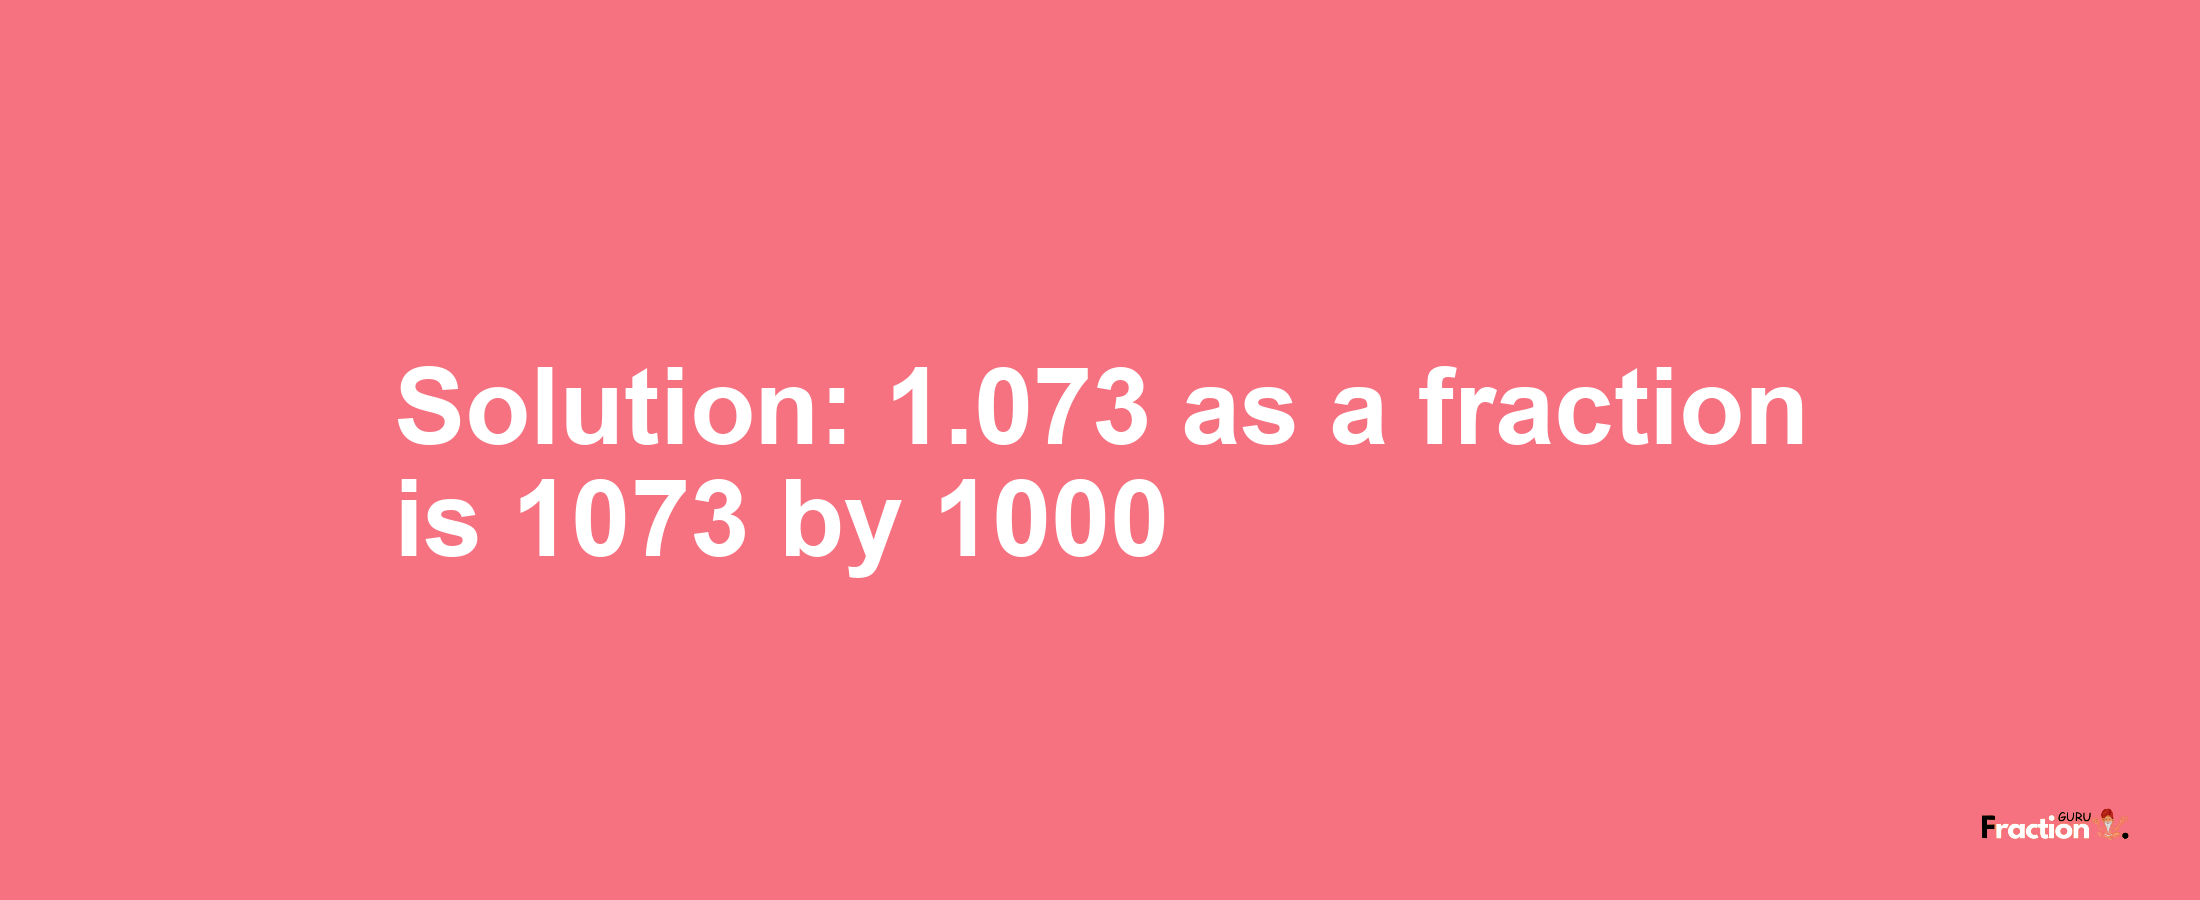 Solution:1.073 as a fraction is 1073/1000